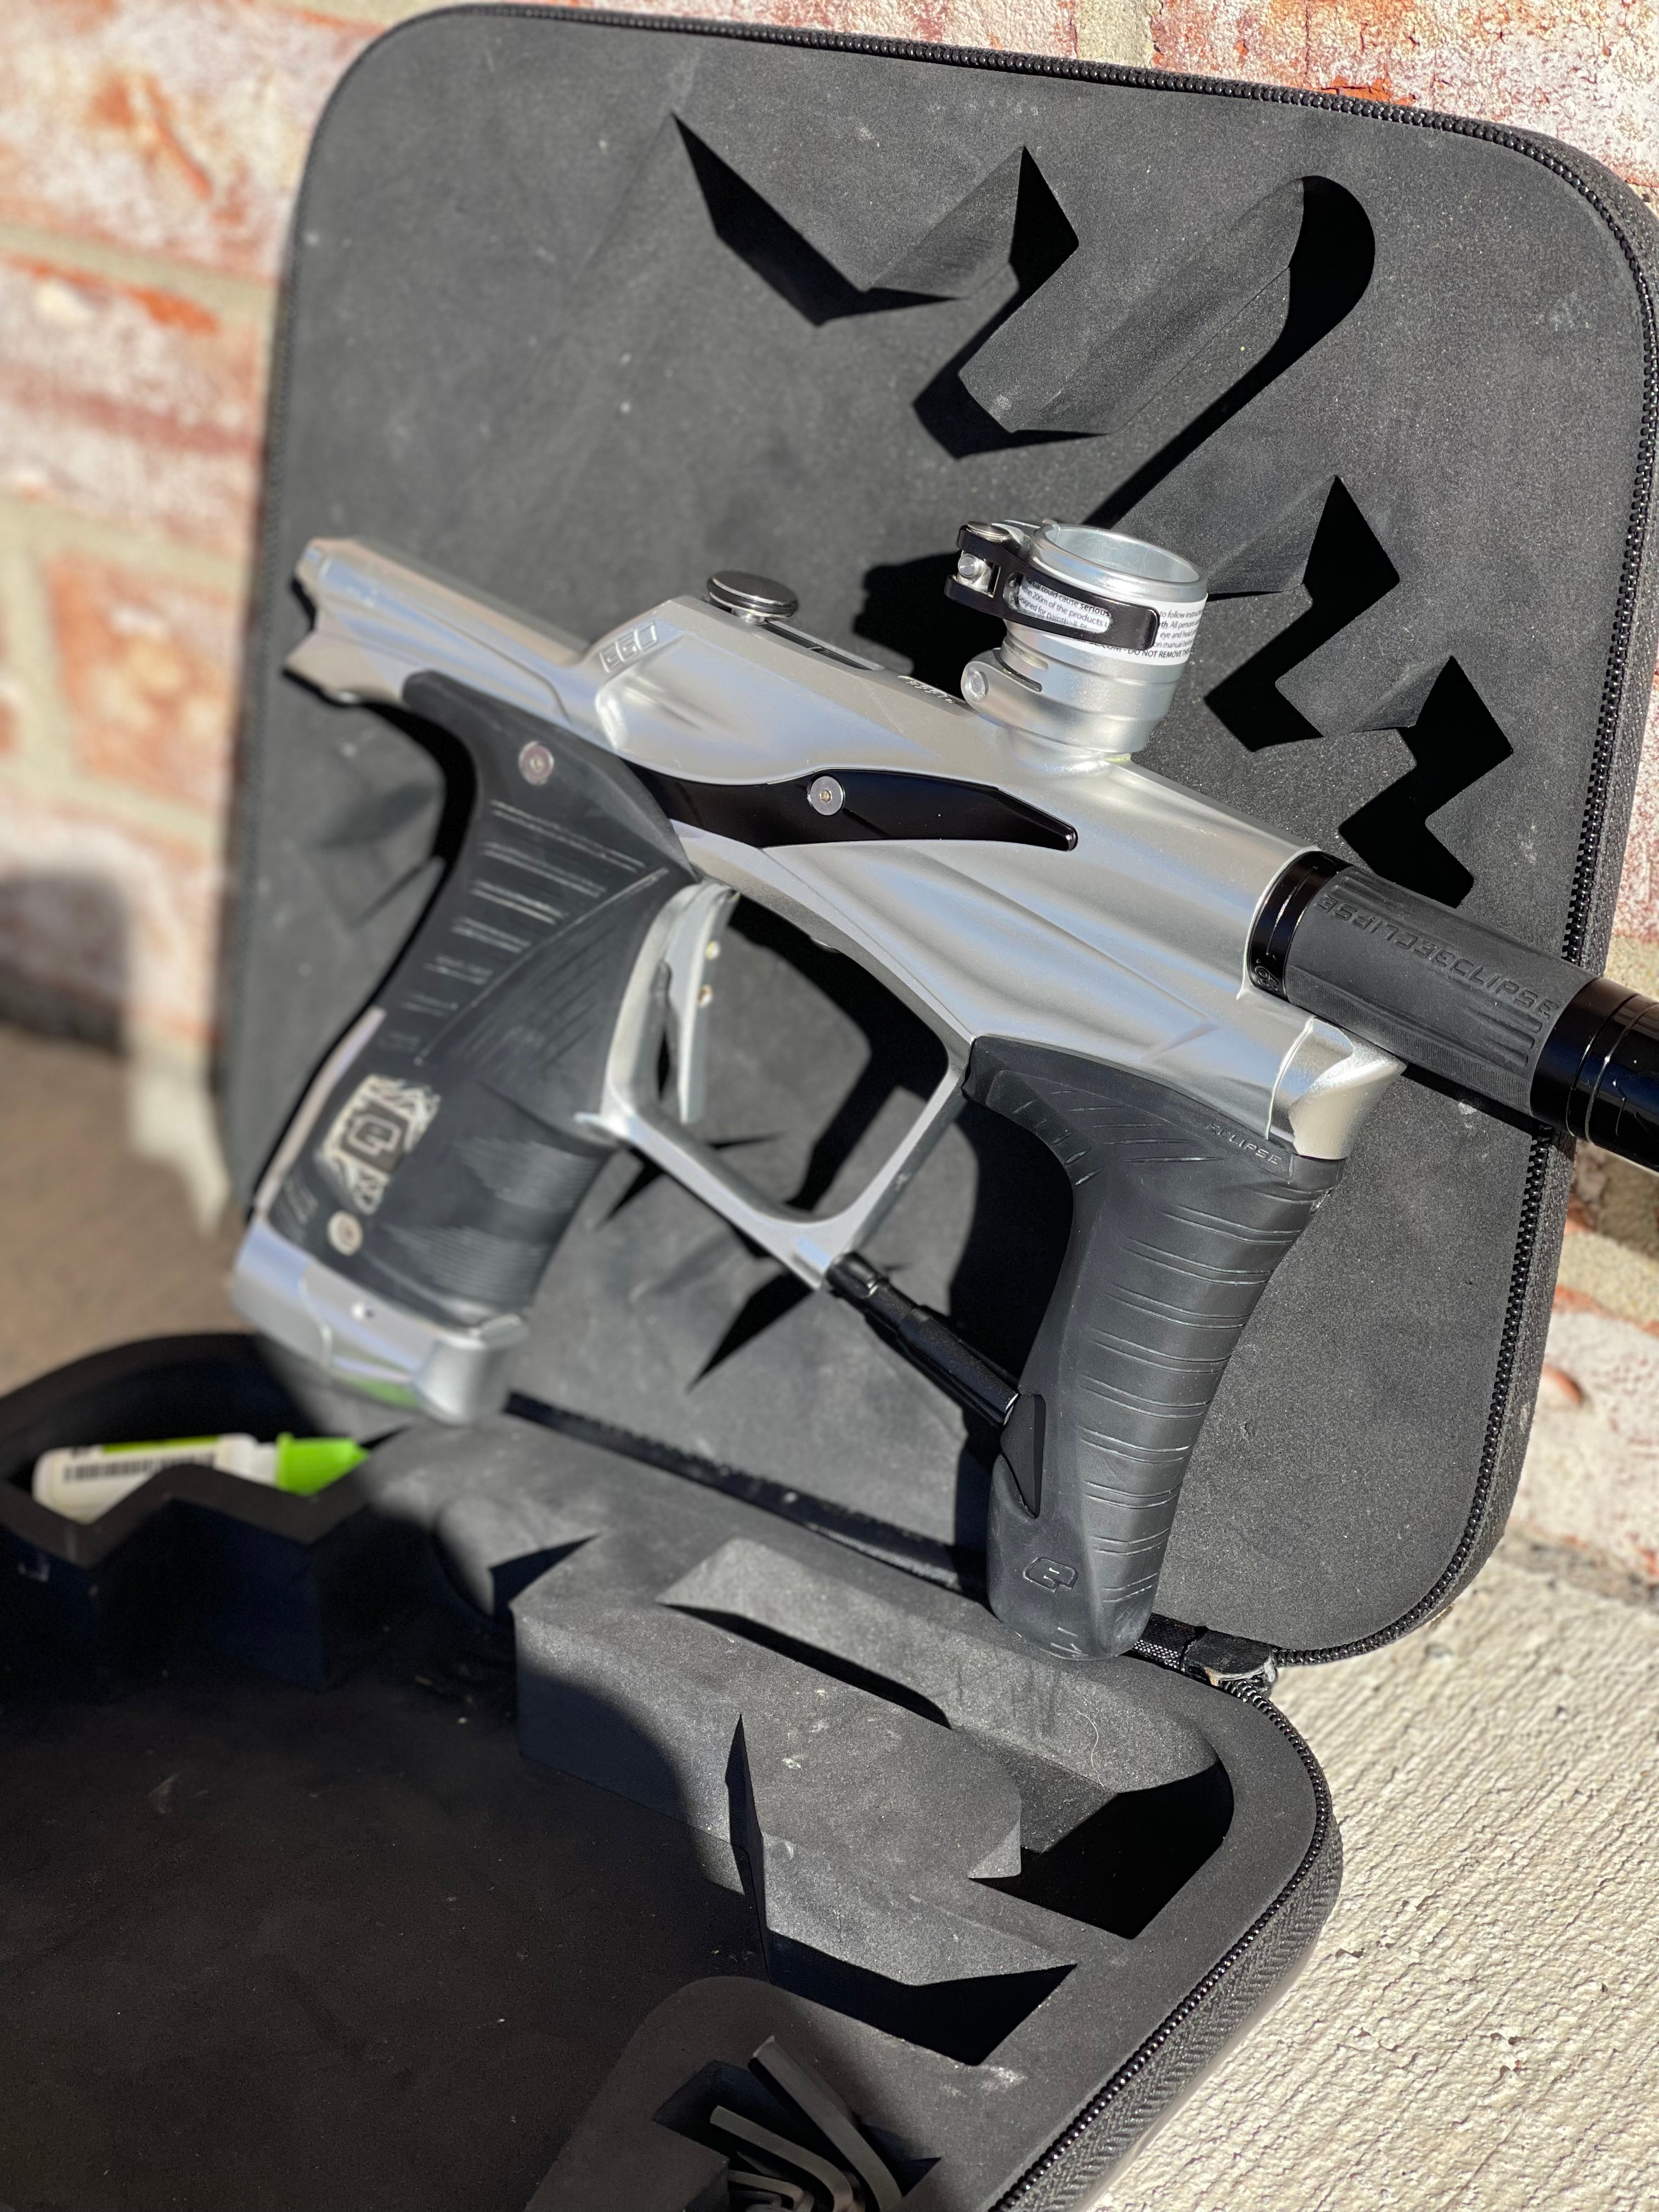 Used Planet Eclipse Lv1.5 Paintball Gun - Silver/Black